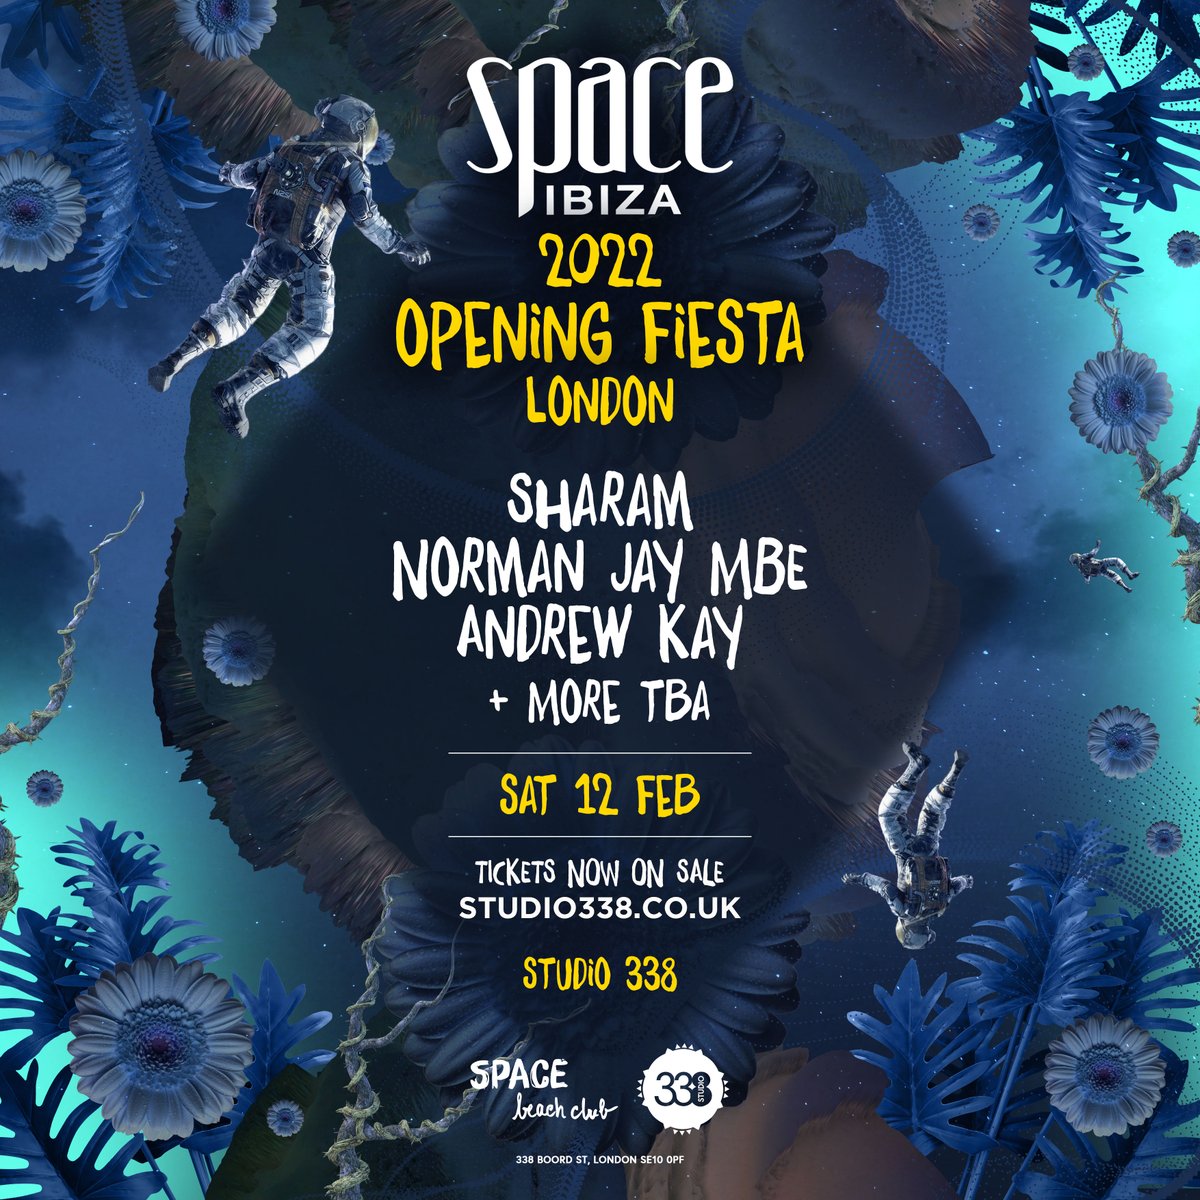 LINE-UP ANNOUNCED 🚨 We are delighted to announce the legendary @djsharam alongside @normanjaymbe @andrewkay338 Don’t miss our next party in @studio338 London! 🎟 Tickets: link.dice.fm/ge29c1ca1f46